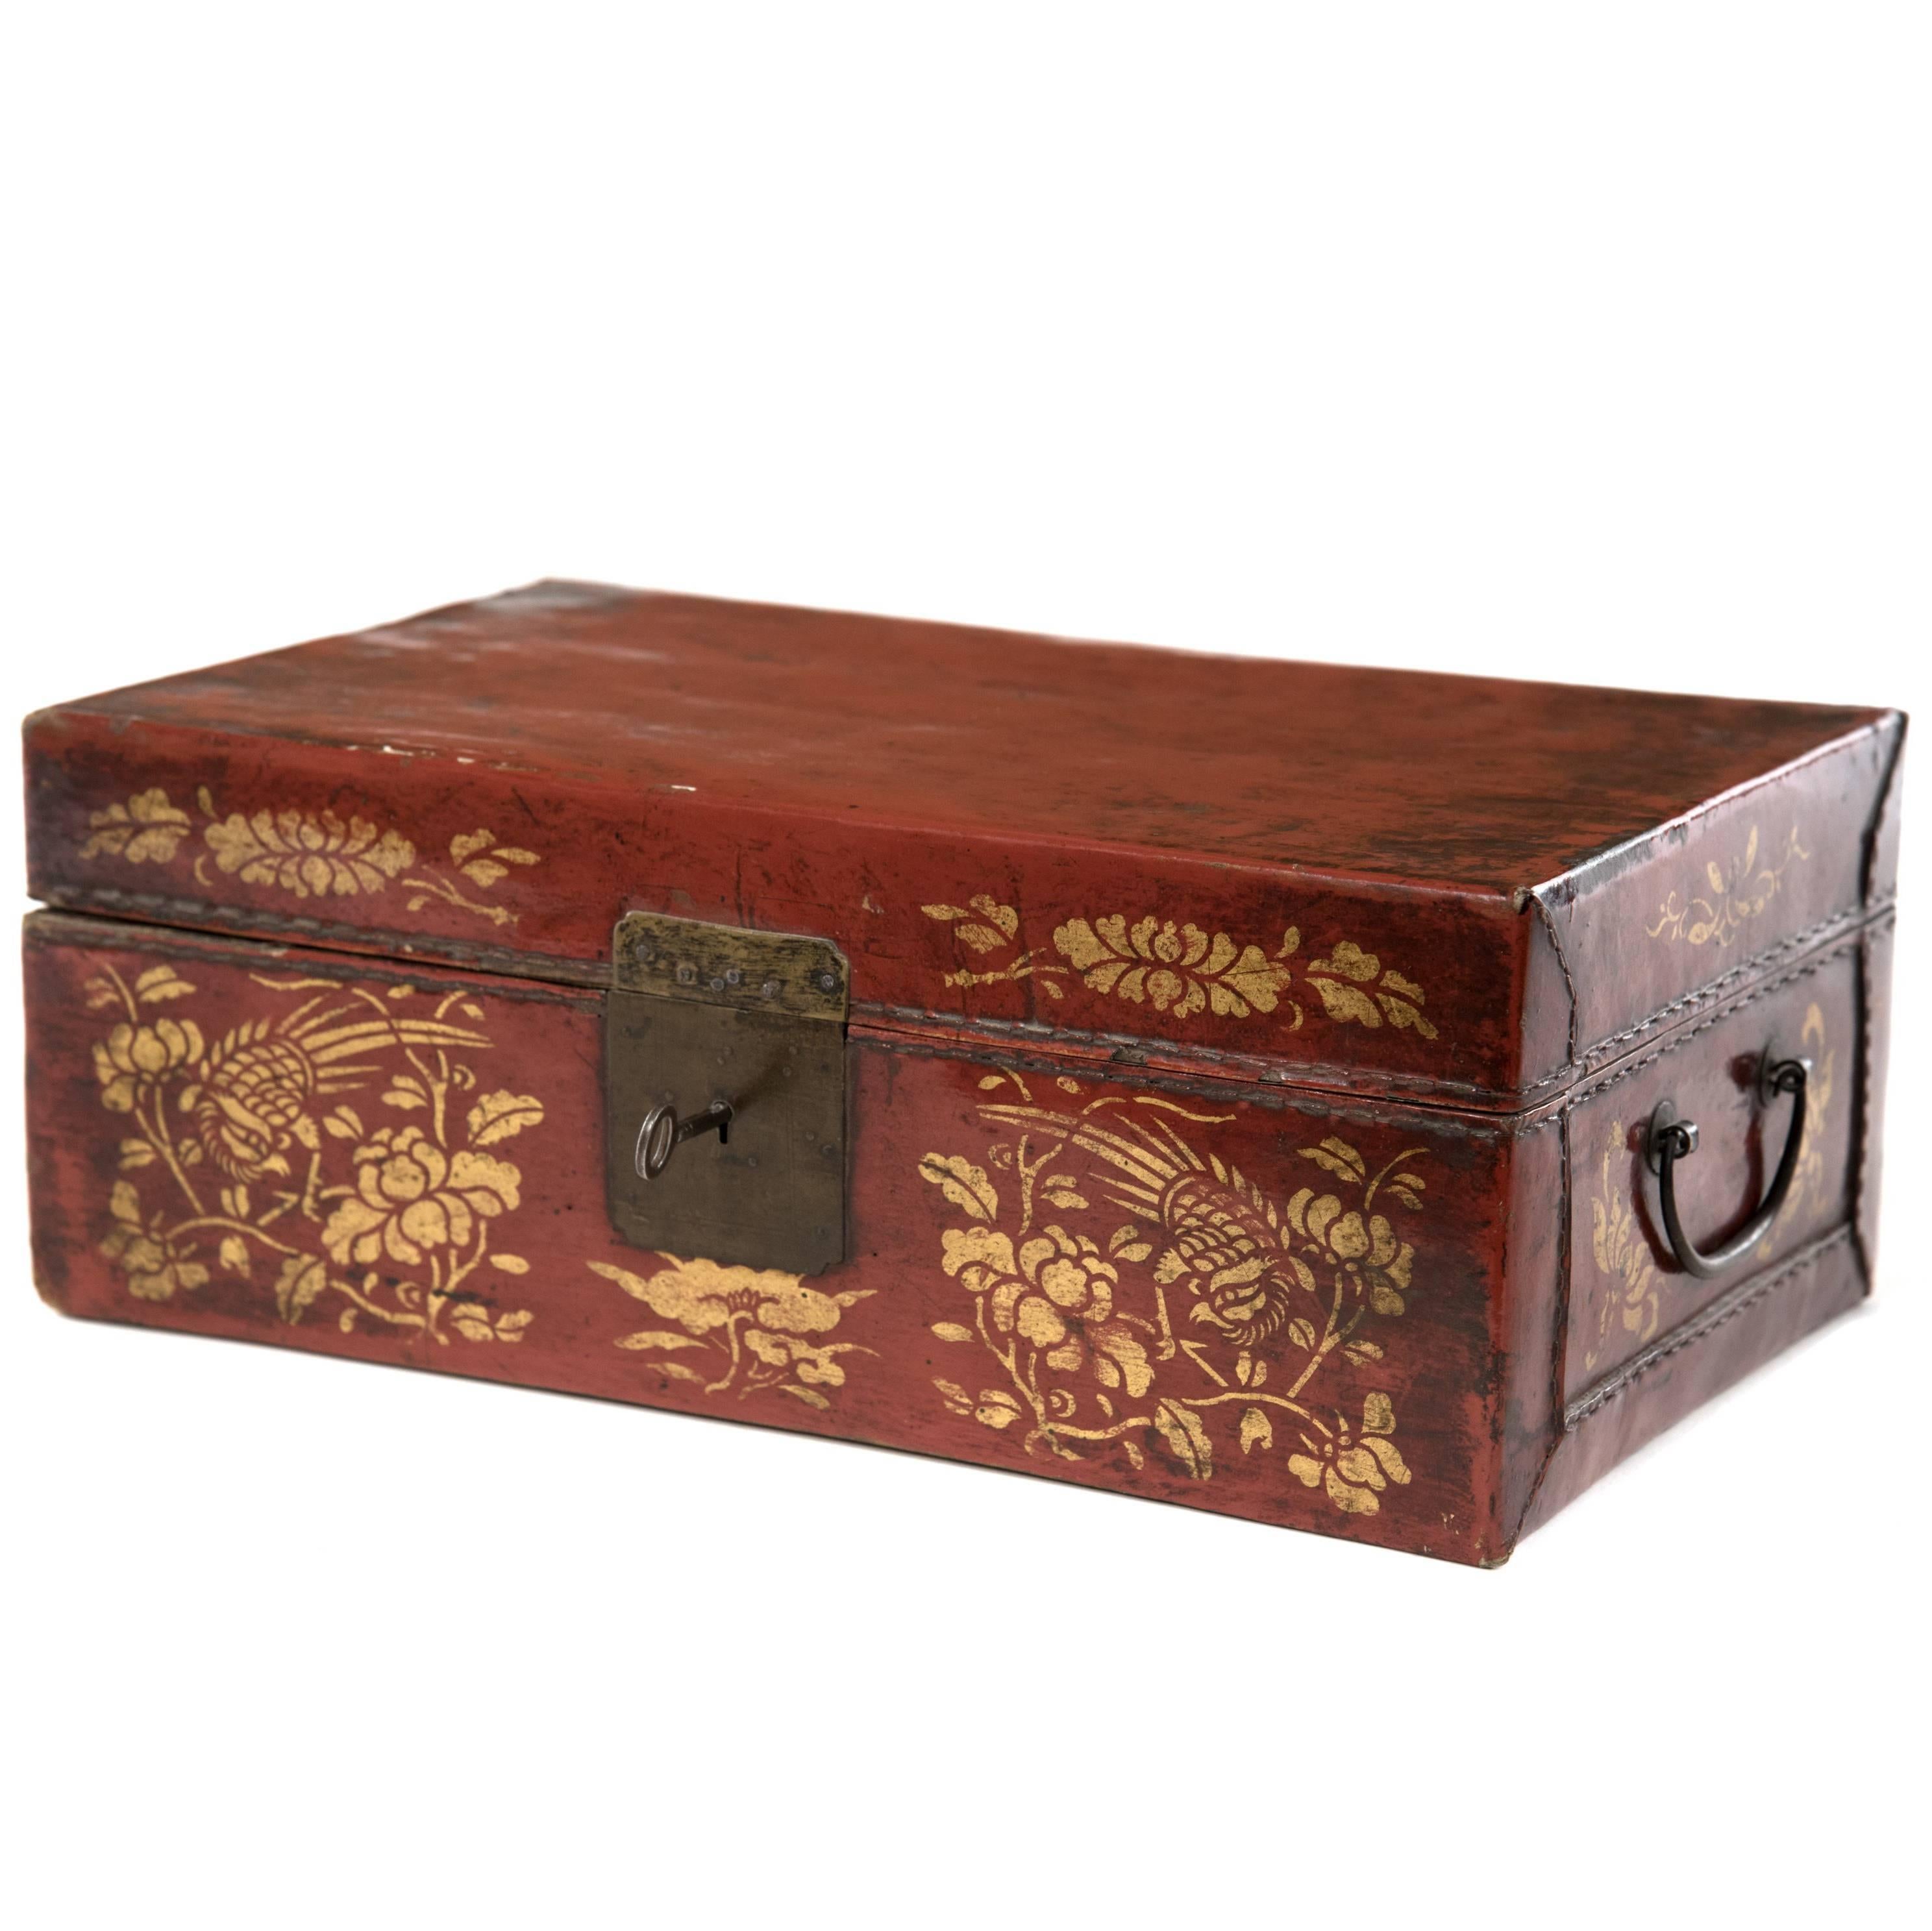 Chinese Red Leather Box with Gold-Stencil Foliate Ornamentation